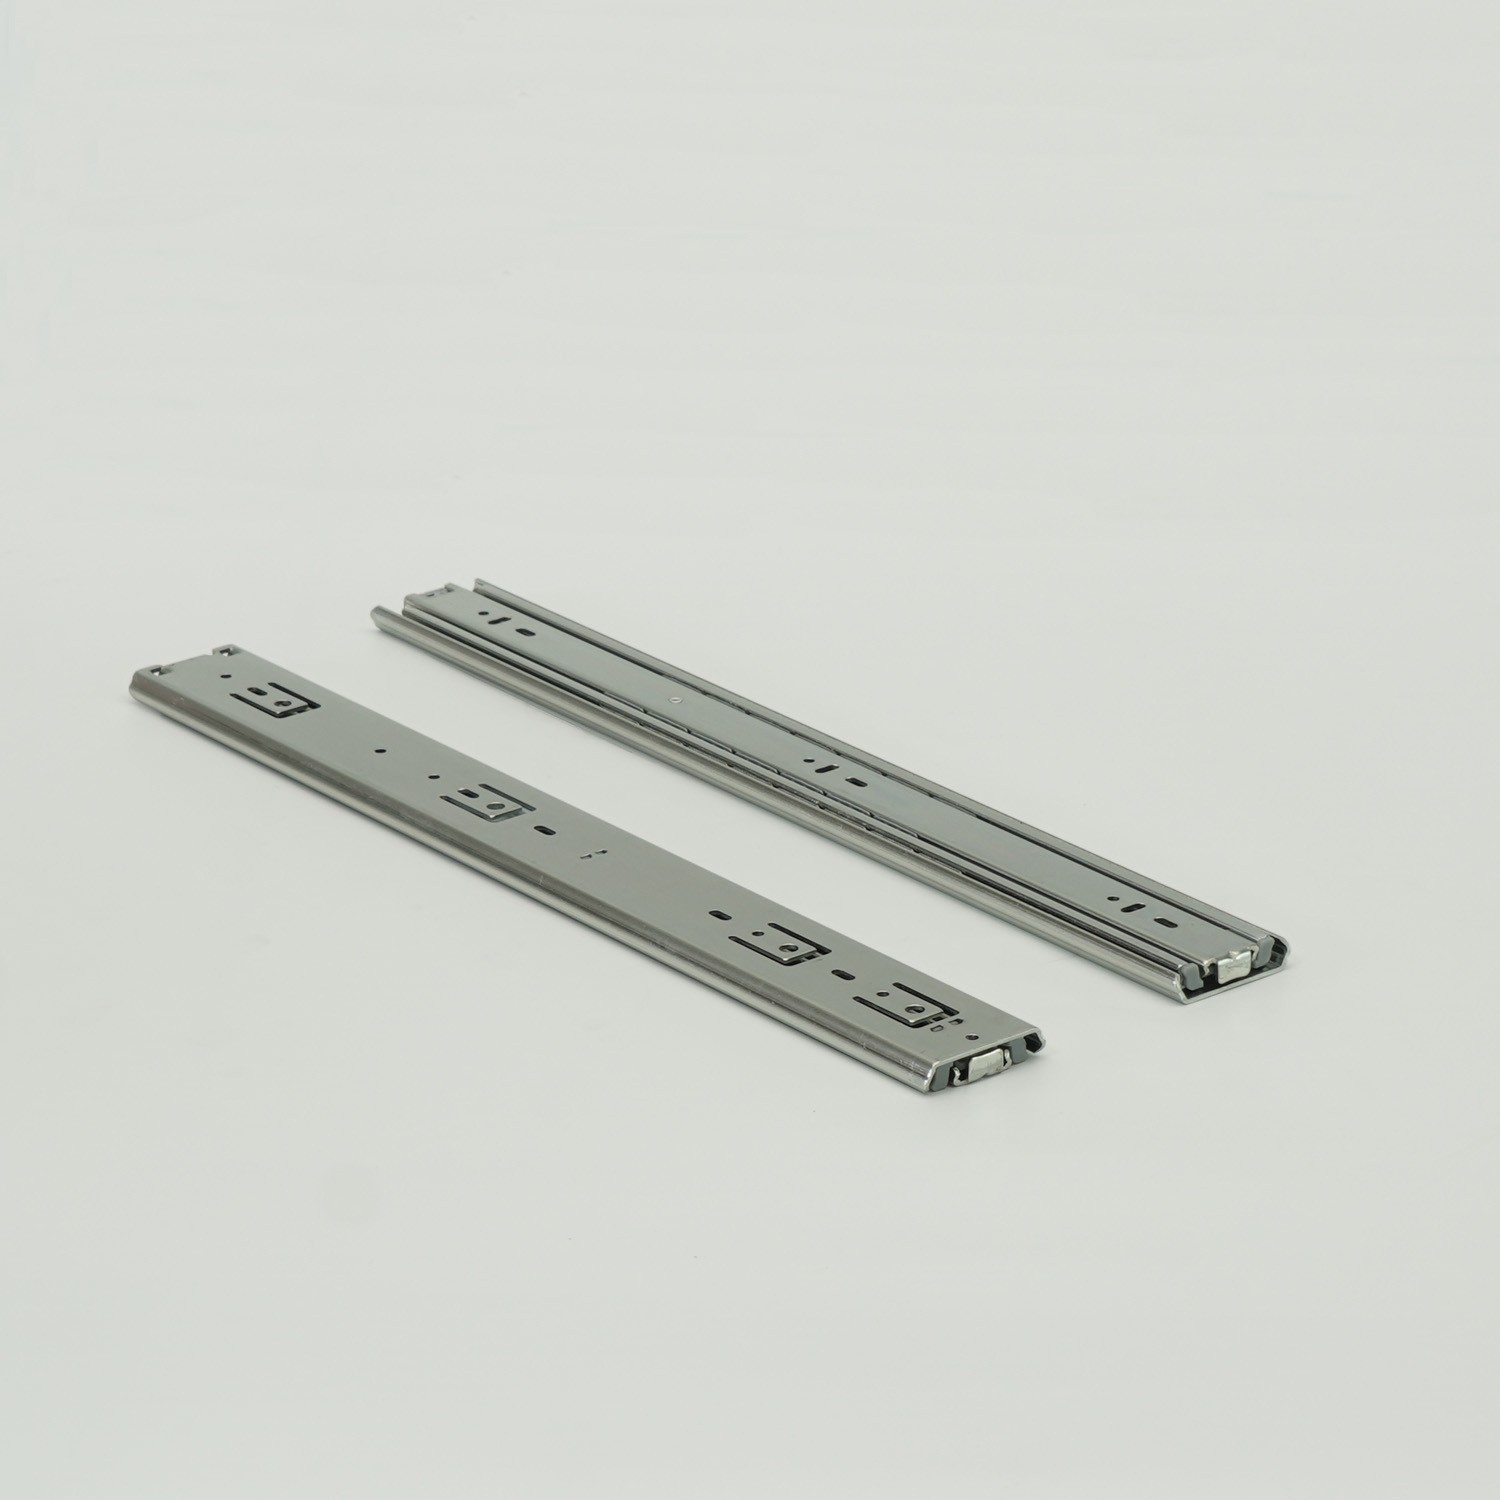 450mm Two-Way (Bidirectional) Extention Heavy-Duty Ball Bearing Drawer Slide